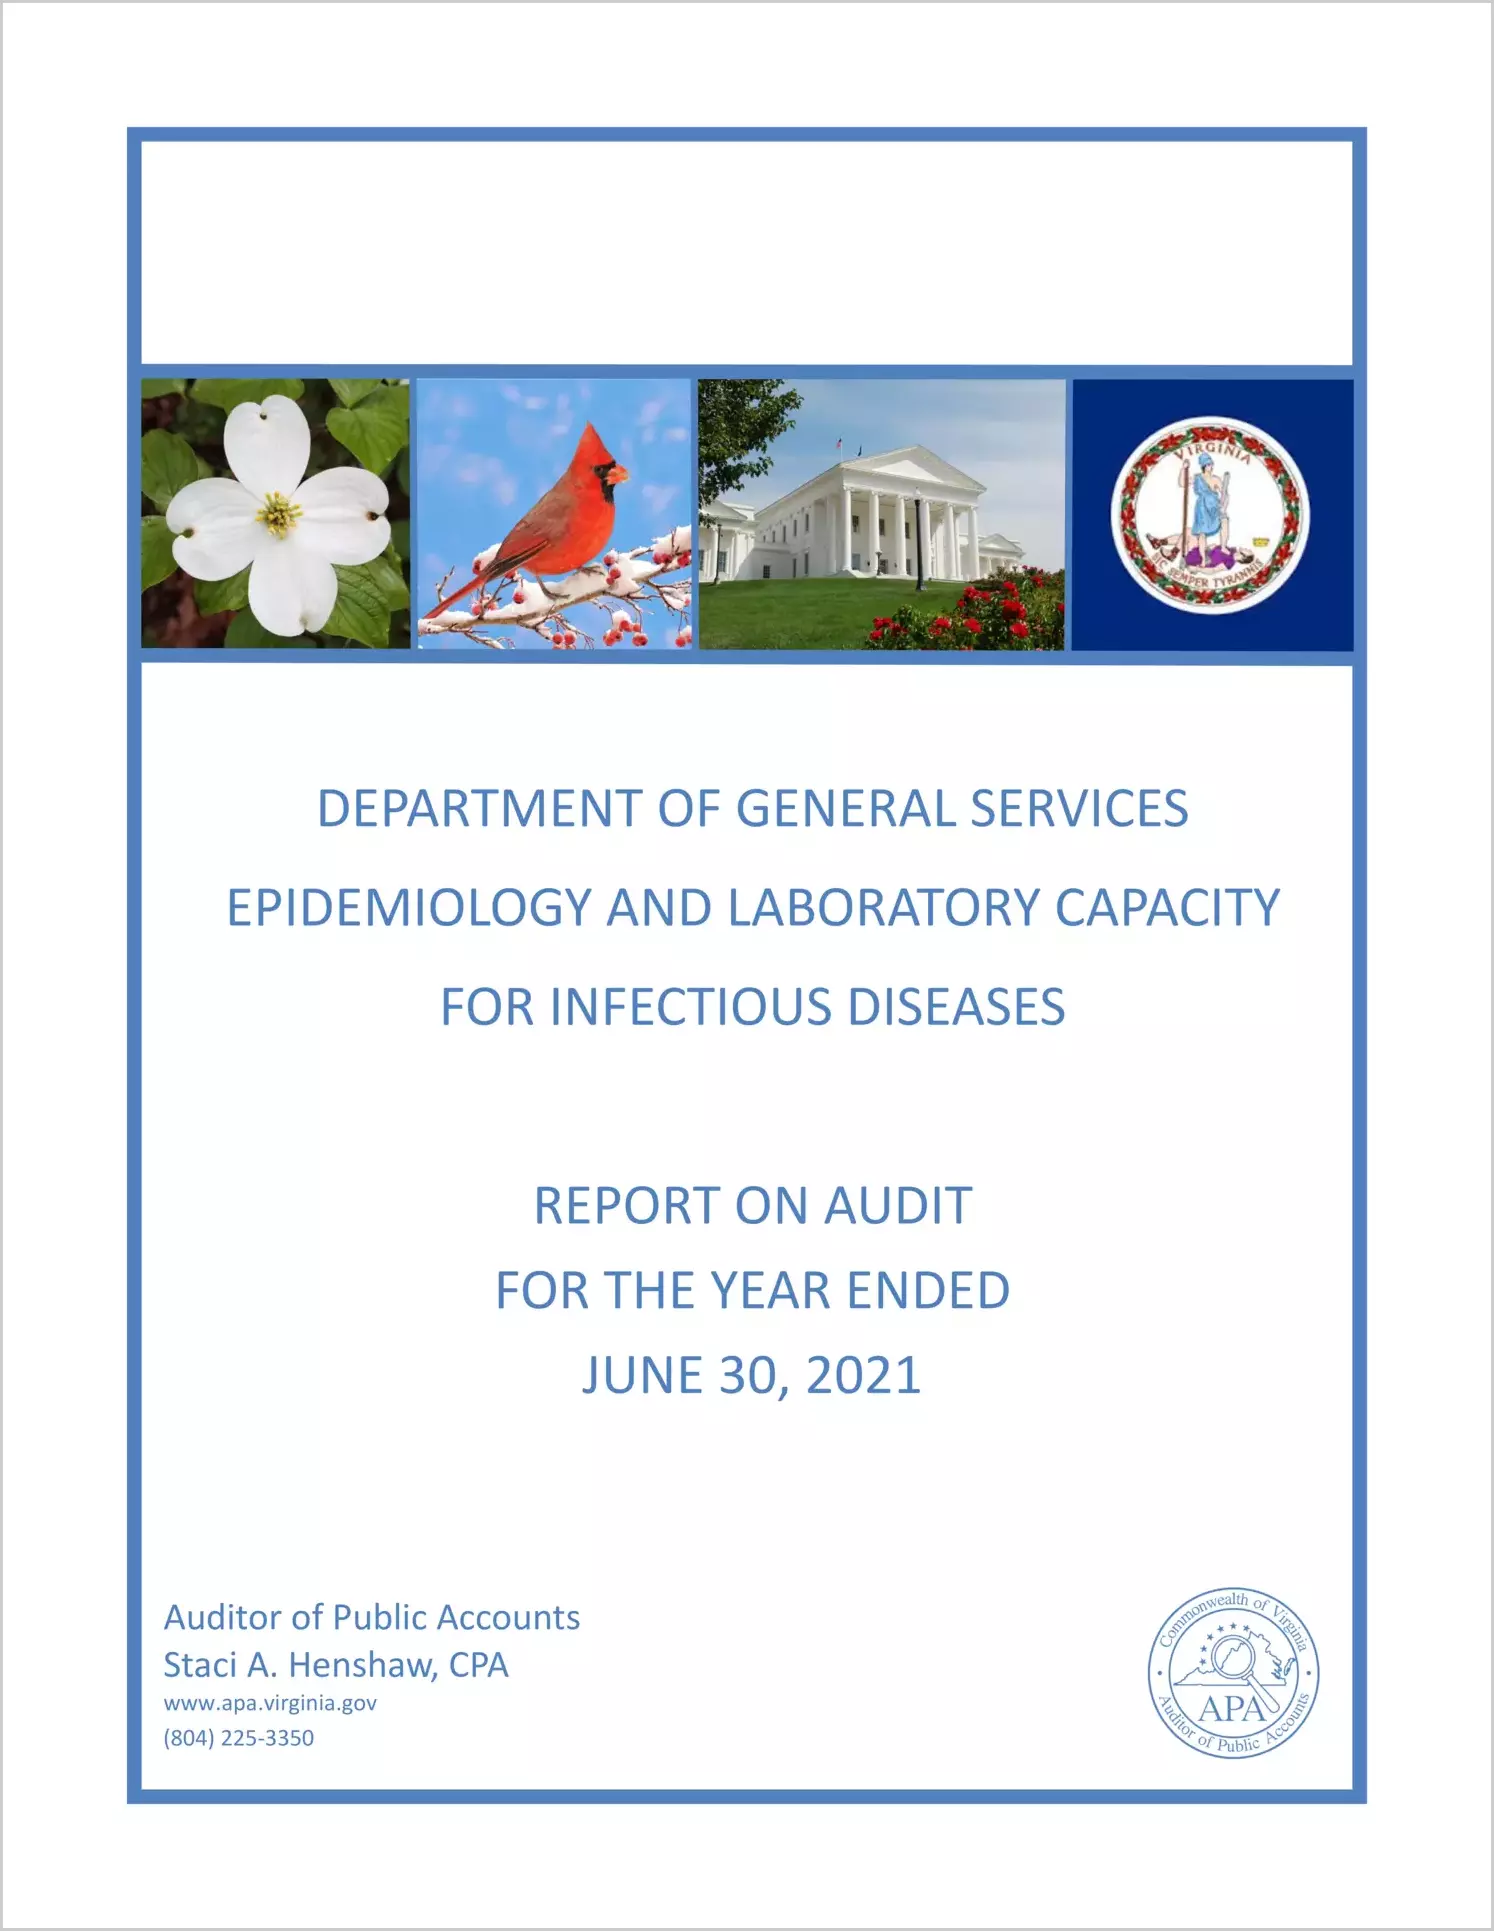 Department of General Services Epidemiology and Laboratory Capacity for Infectious Diseases for the year ended June 30, 2021